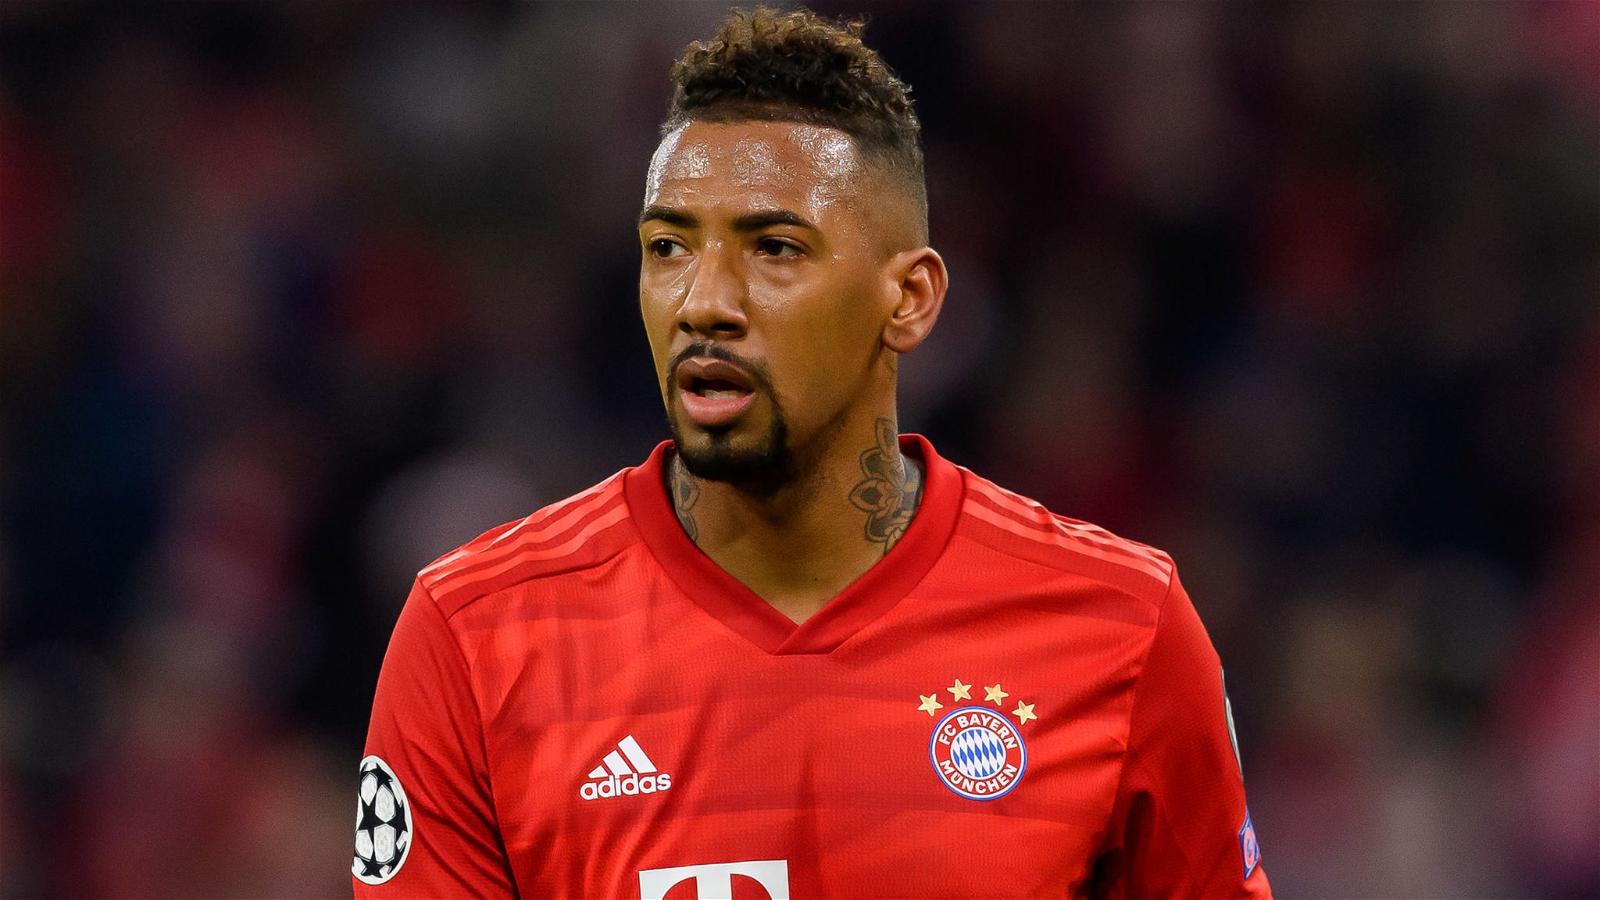 Ruthless Bayern must build on Barcelona rout, says Boateng